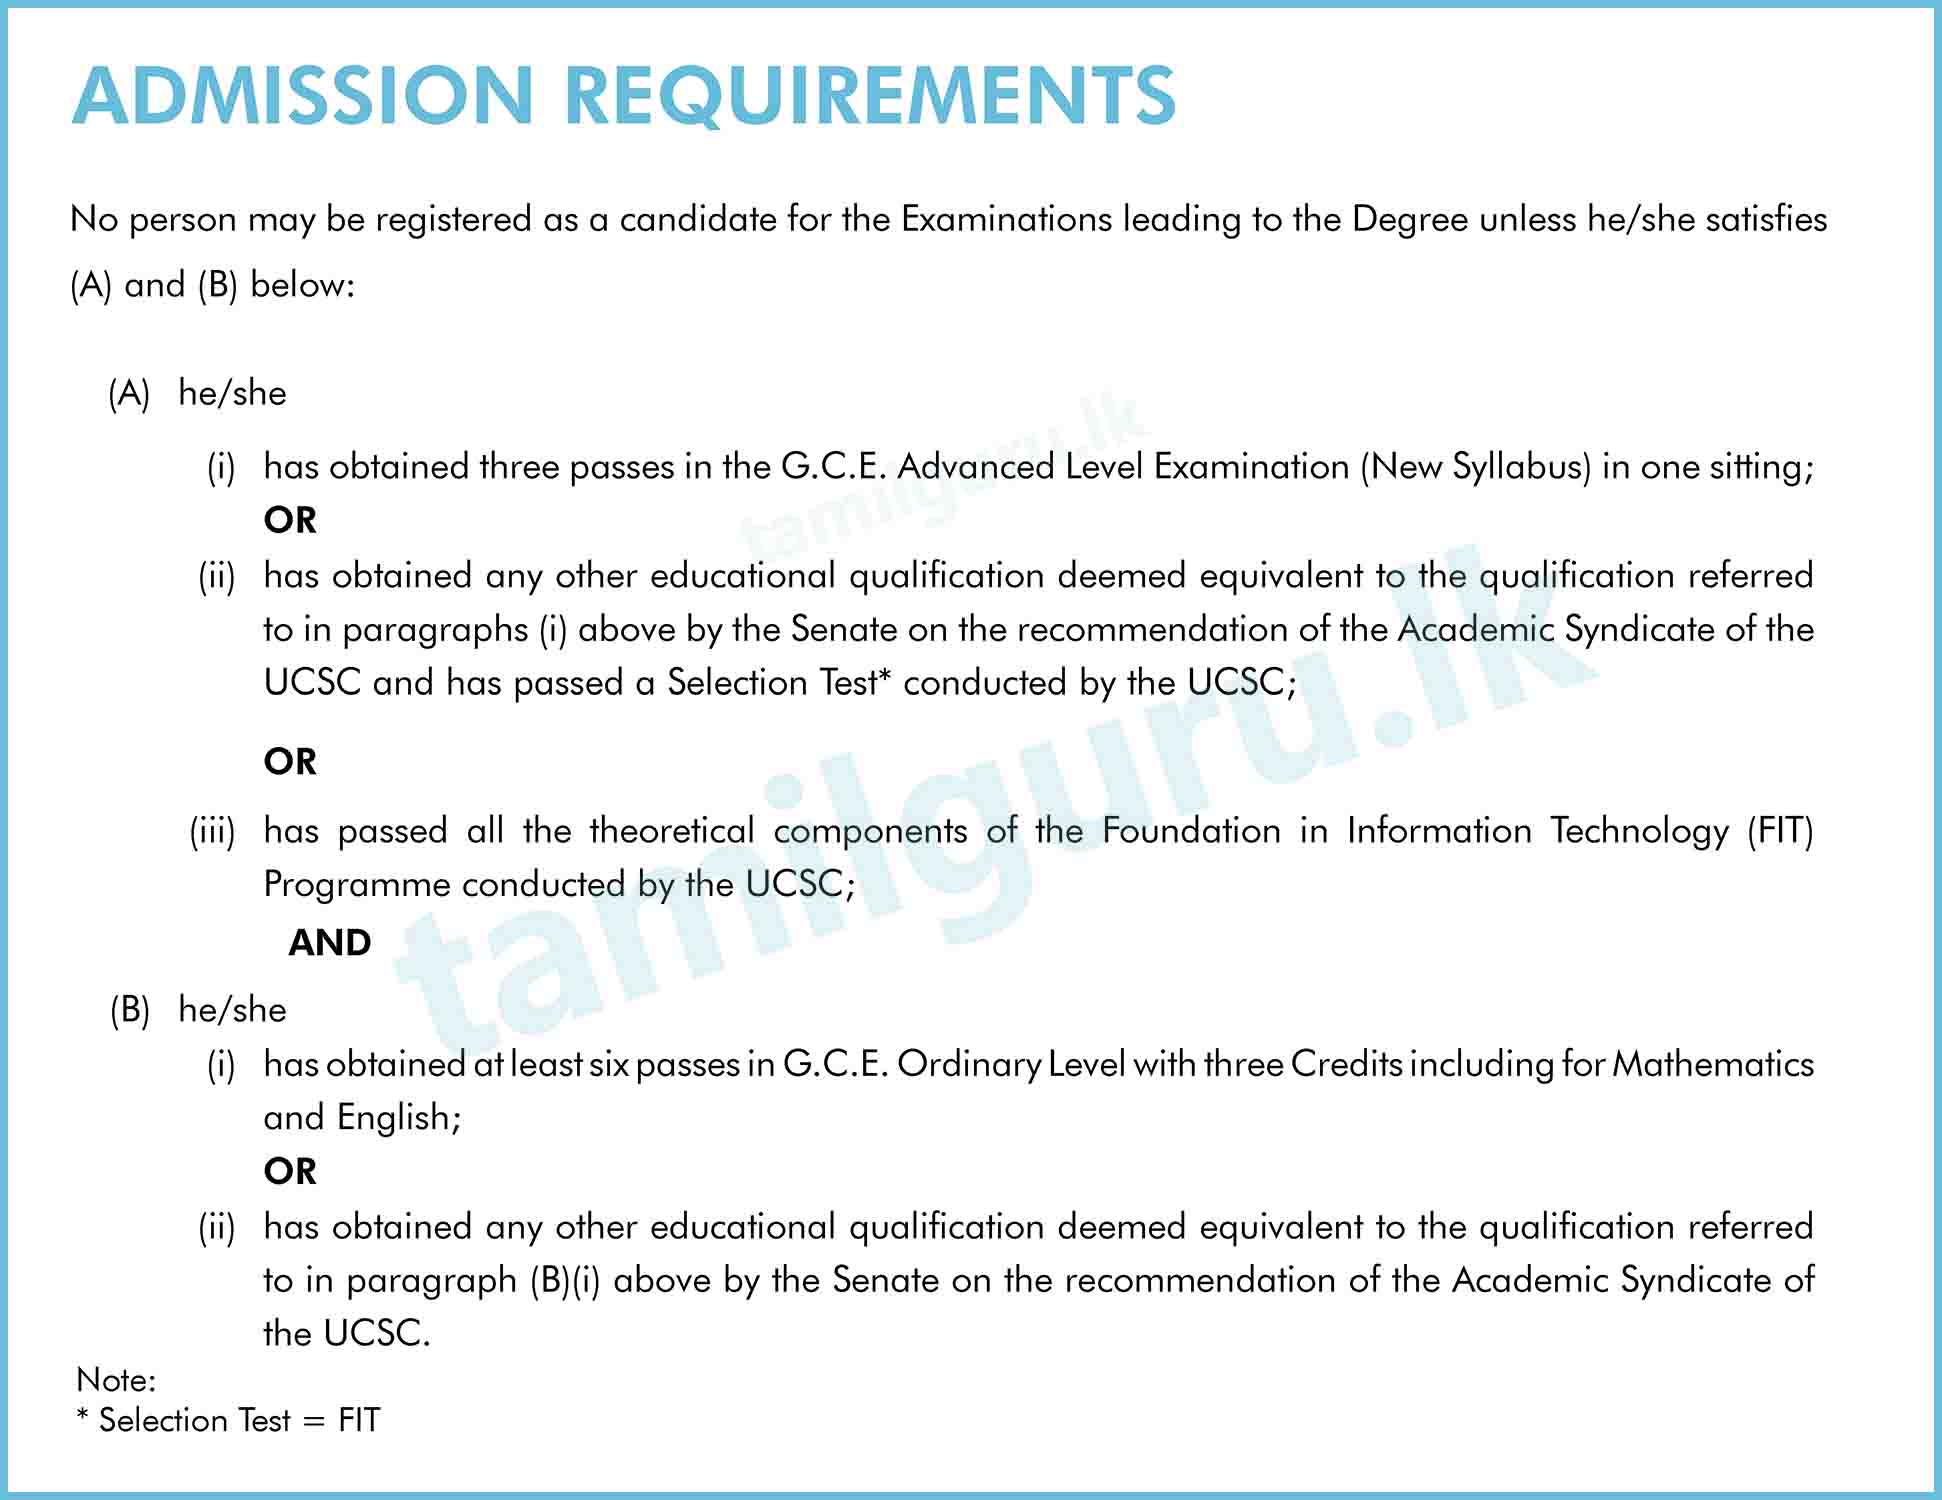 Required Qualifications for Bachelor of Information Technology (BIT) (External) Degree Programme at UCSC